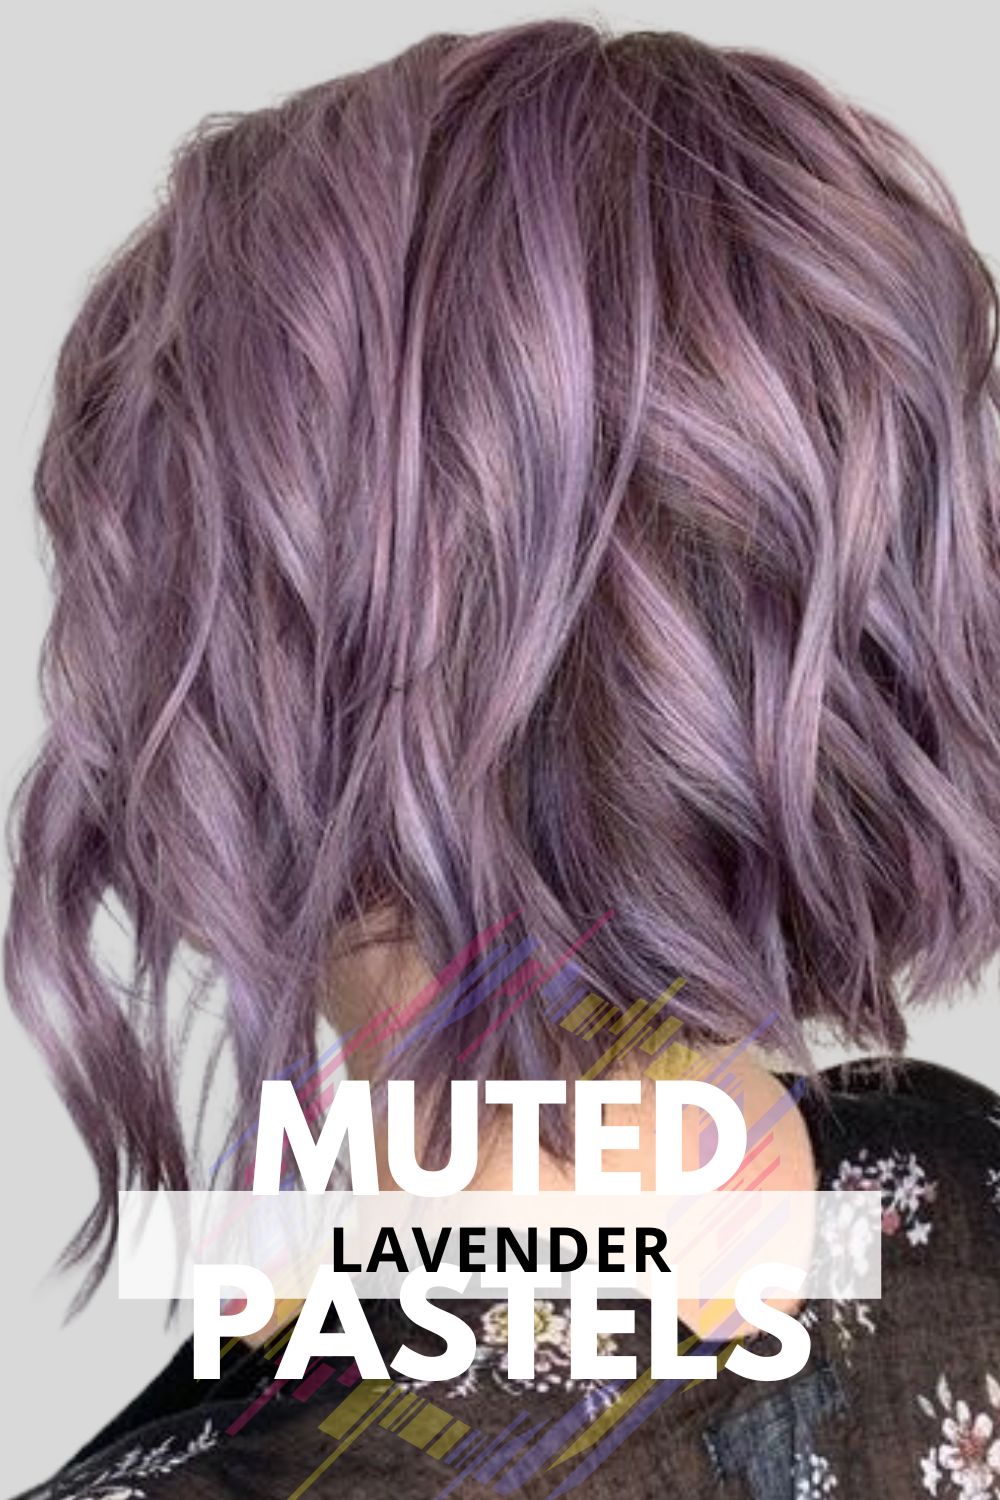 Muted Pastels Lavender